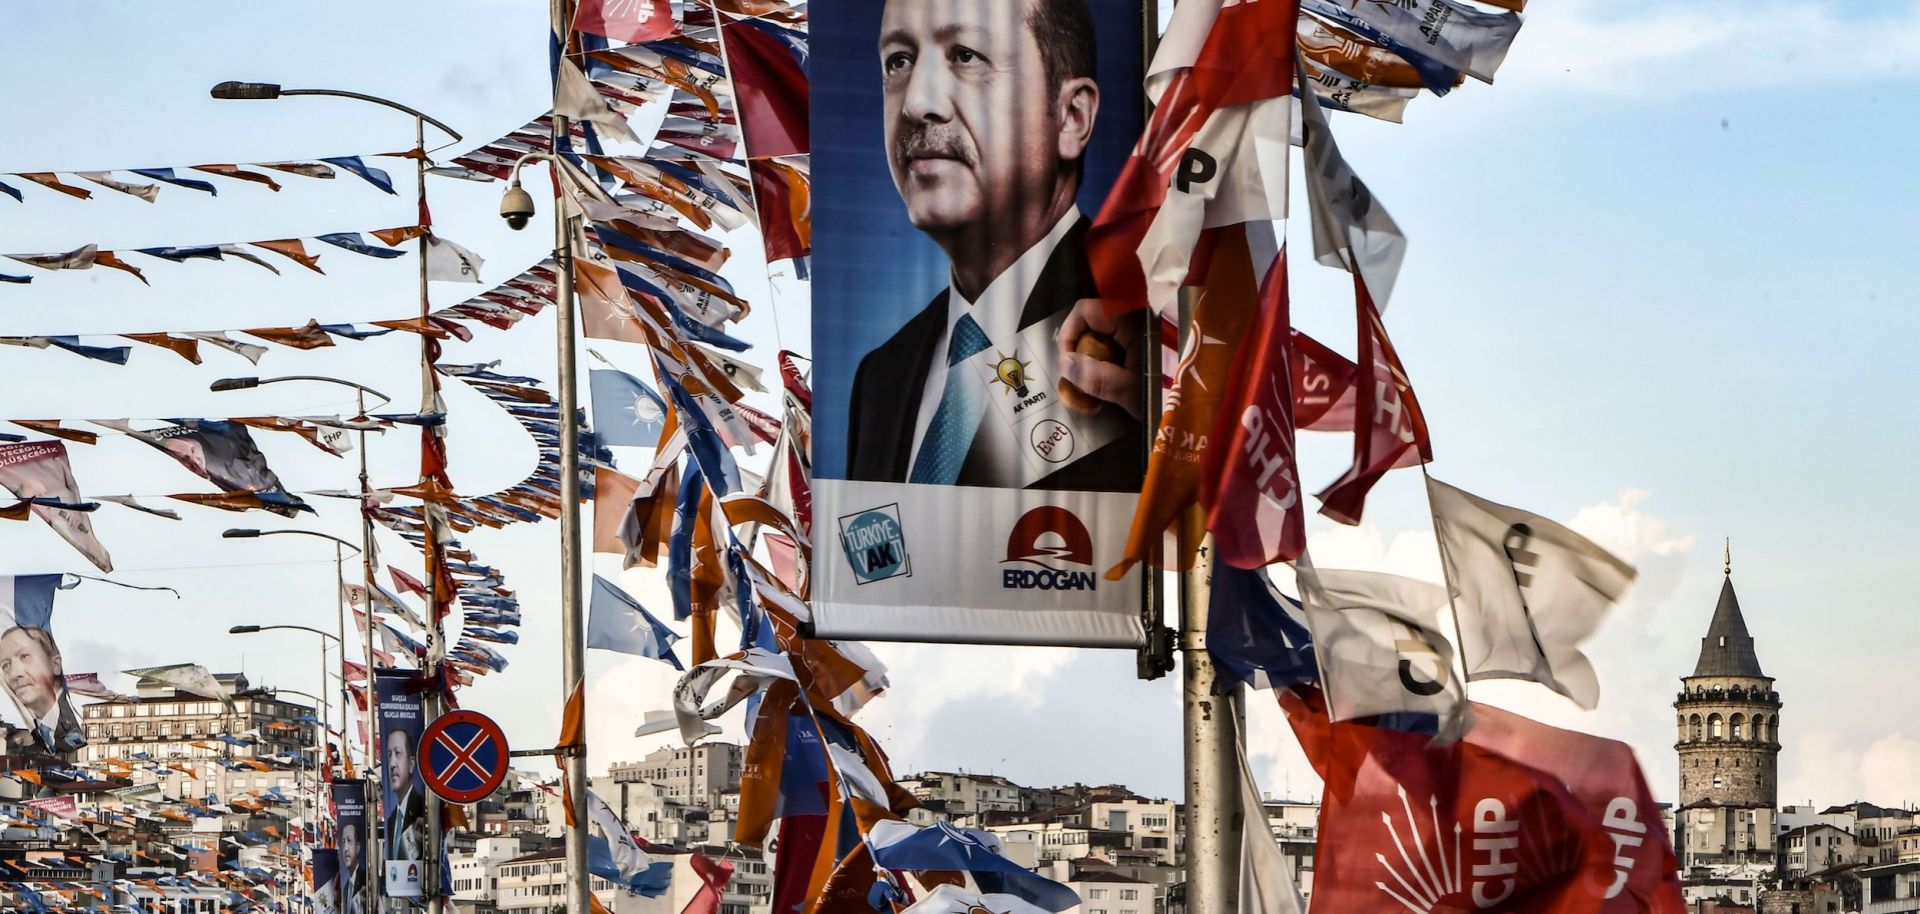 A bridge in Istanbul, Turkey, is festooned with campaign flags for Turkish President Recep Tayyip Erdogan.